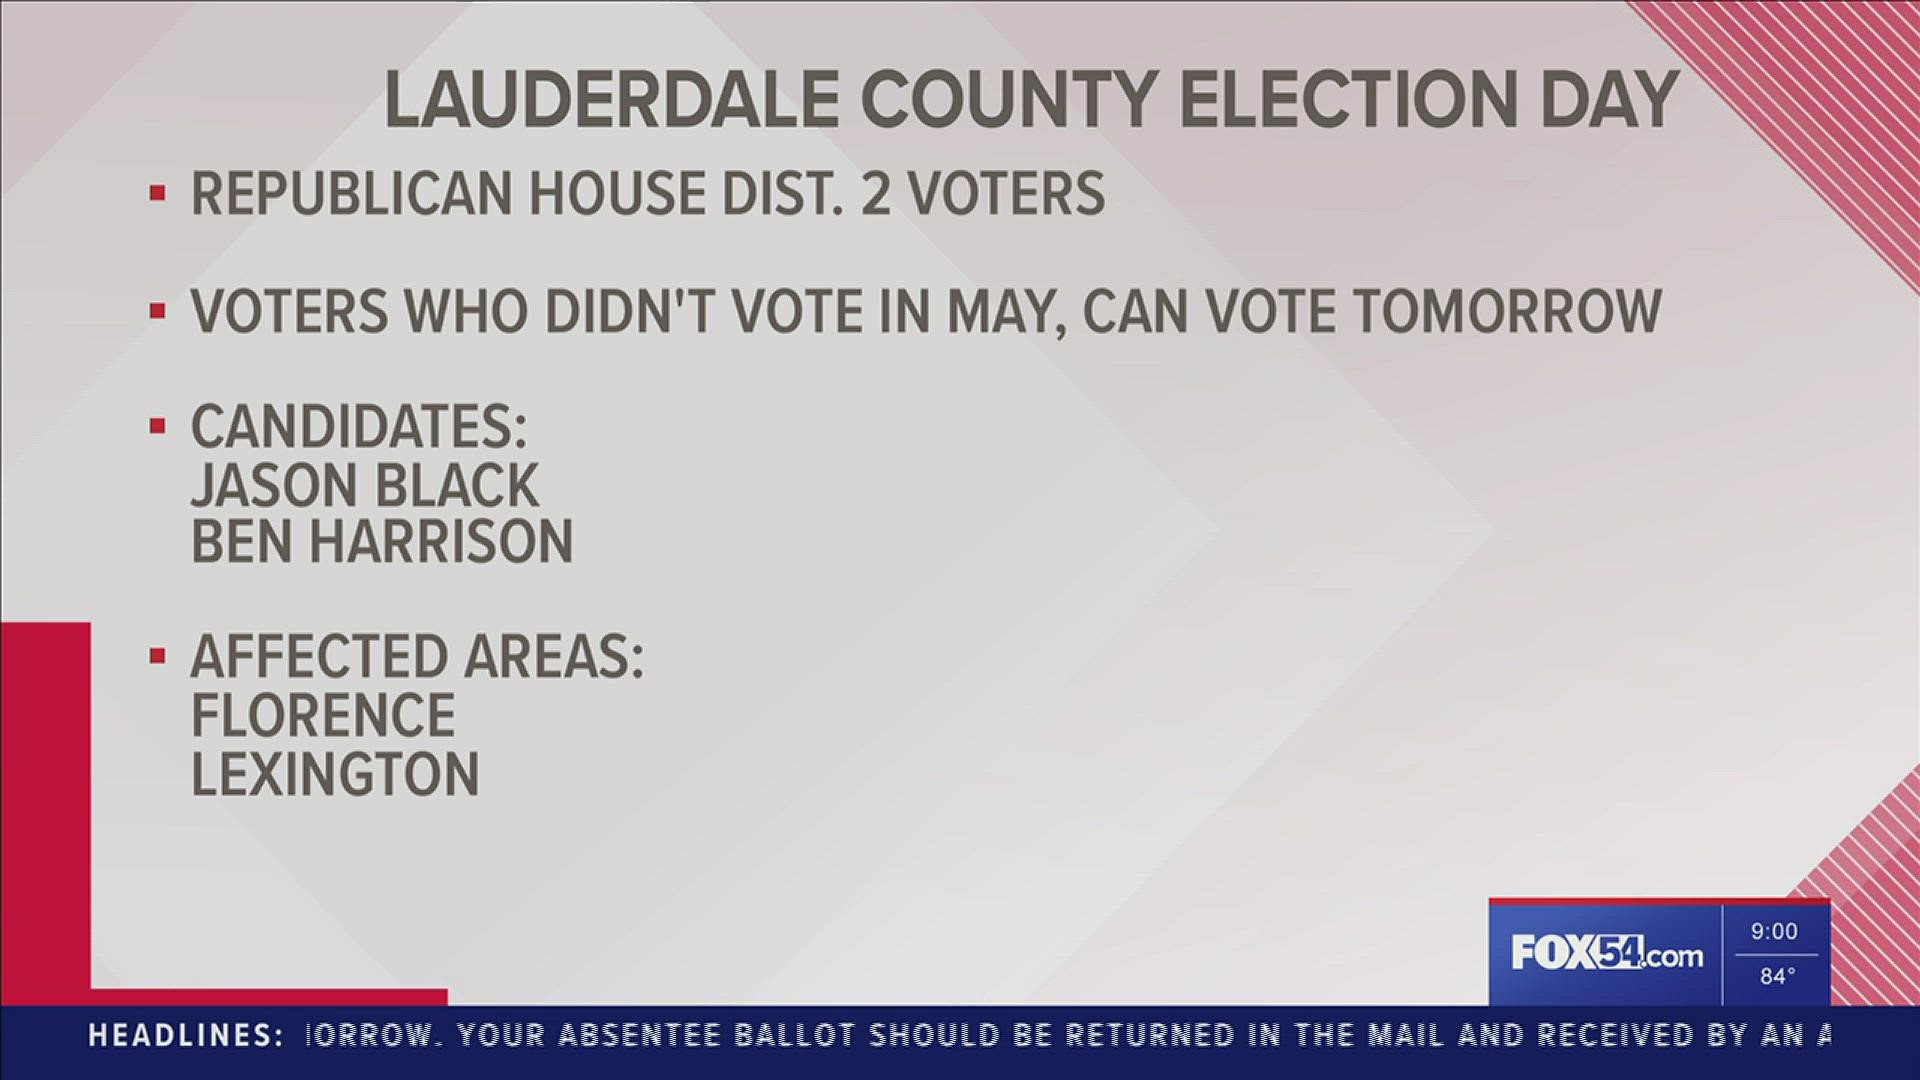 Lauderdale County Republicans who voted in wrong district in primary election can still vote in House District 2 run-off upon request.